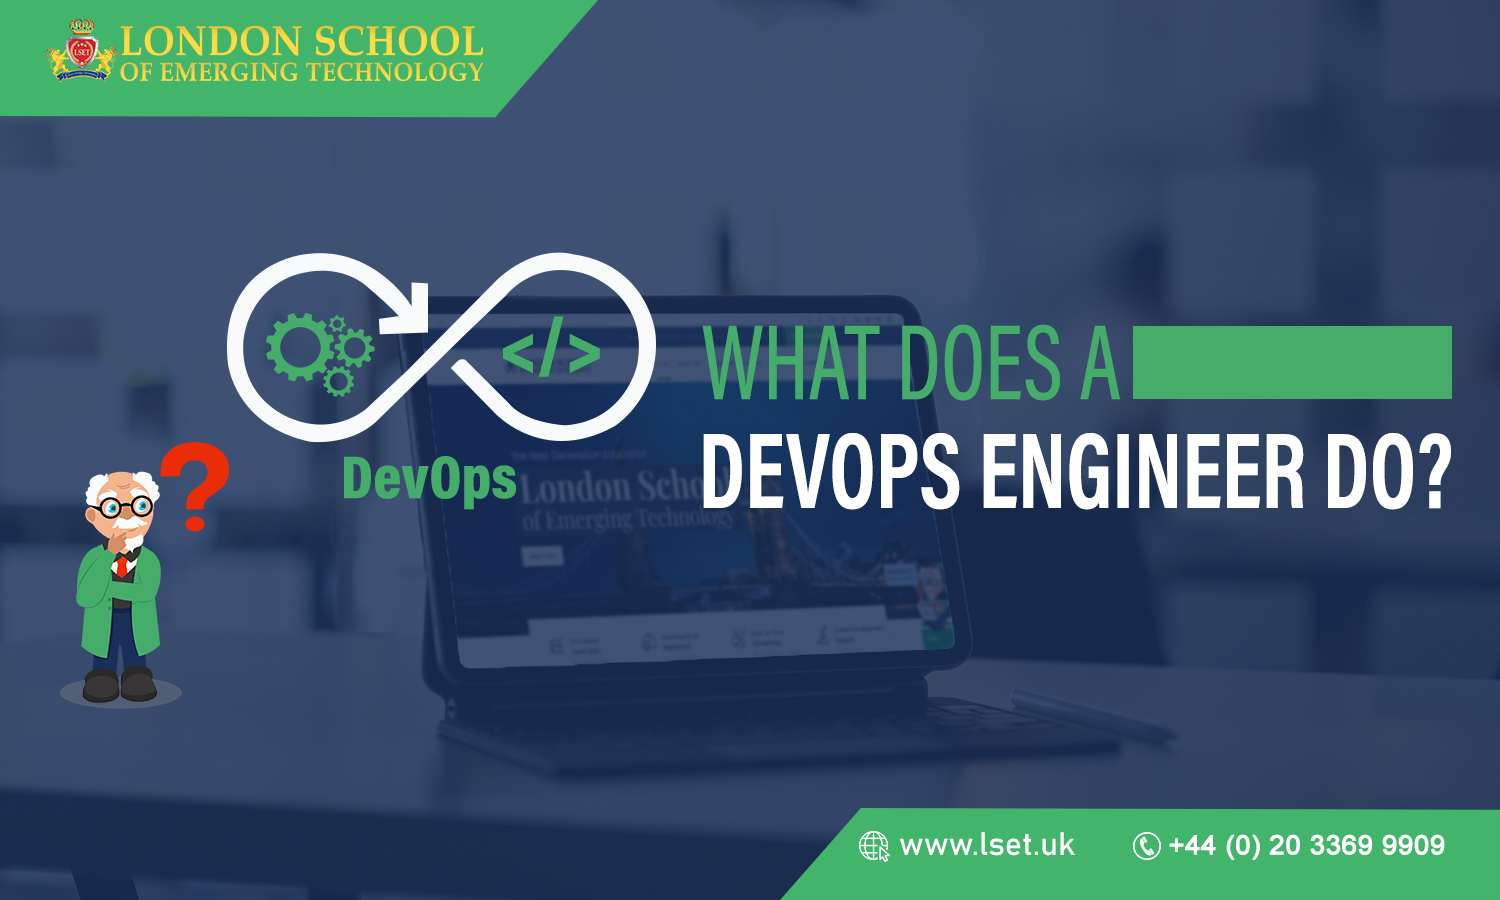 What Does a DevOps Engineer Do